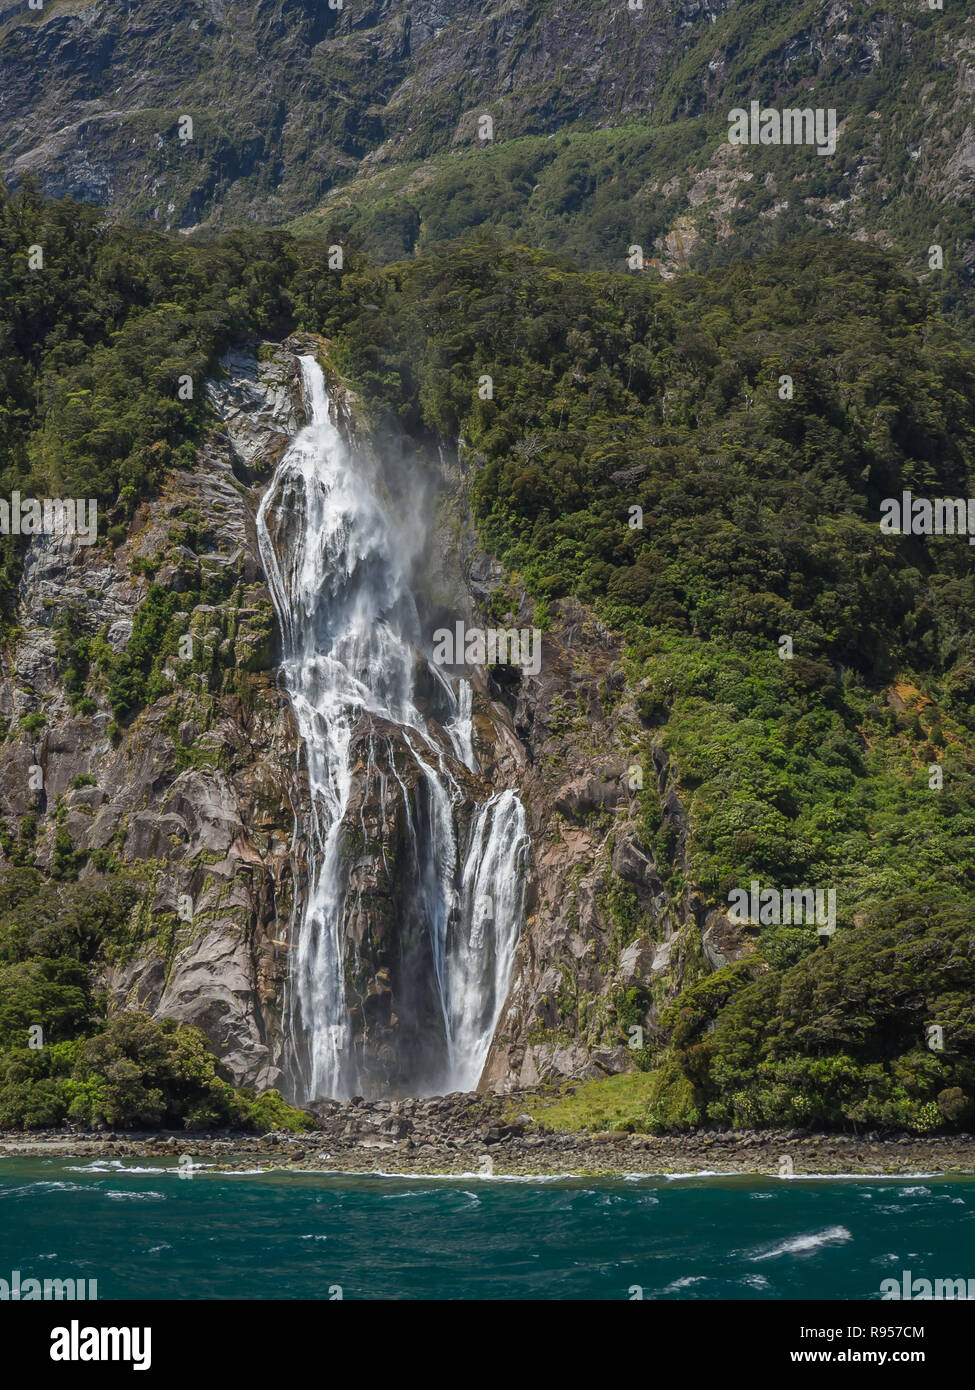 Stirling Falls releases a torrent of water down a rocky mountainside into Milford Sound in Fiordland National Park on the South Island of New Zealand Stock Photo